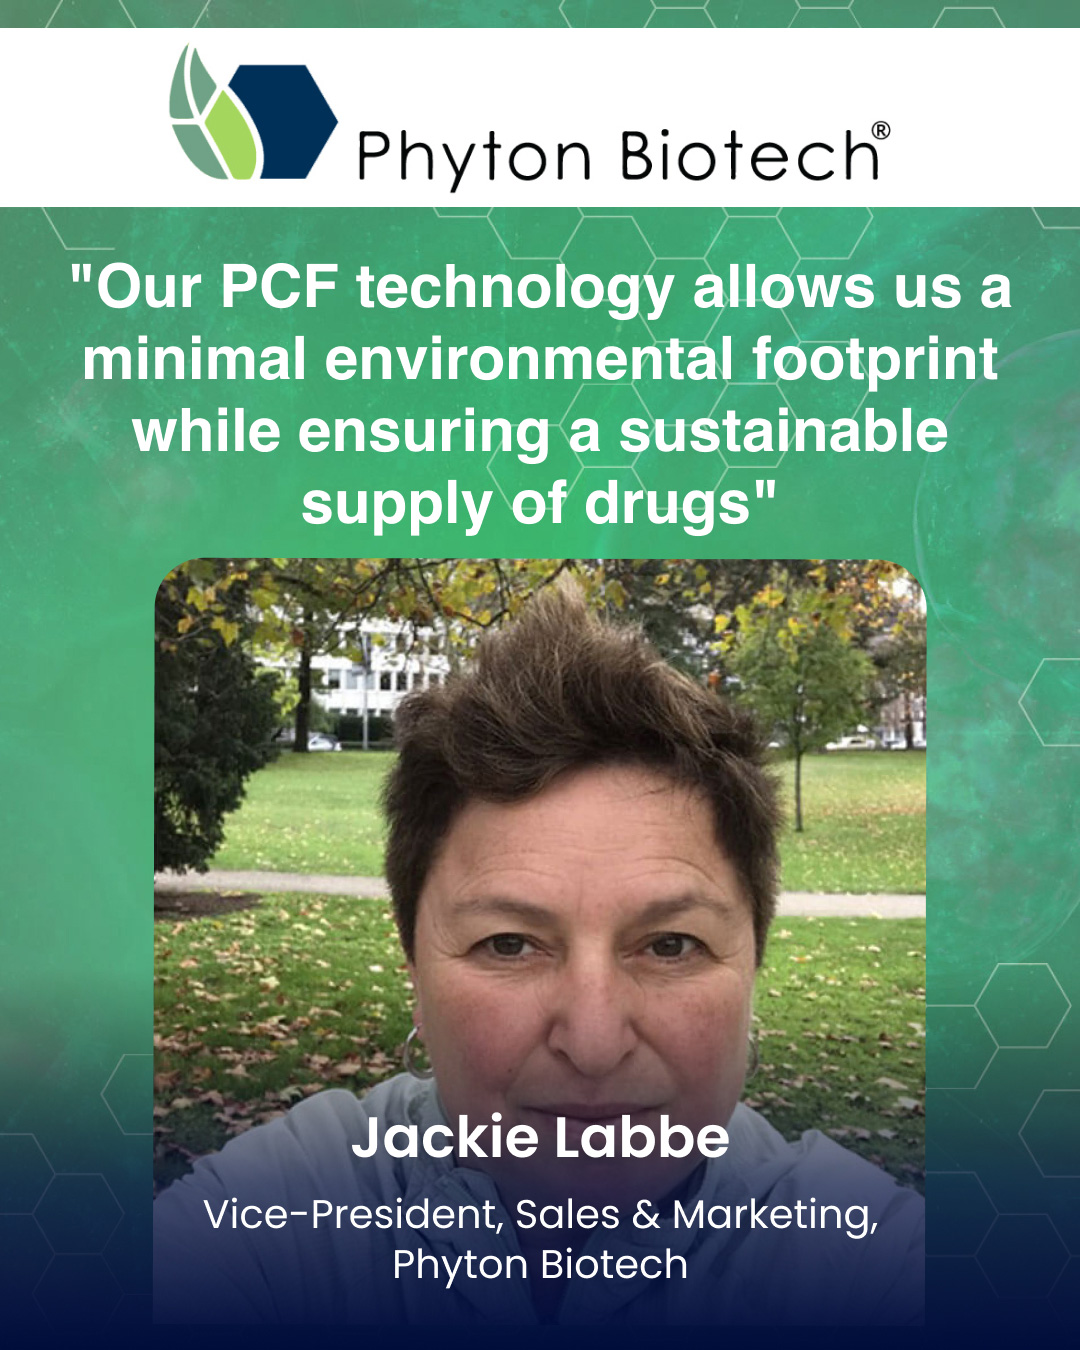 "Our PCF technology allows us a minimal environmental footprint while ensuring a sustainable supply of drugs"